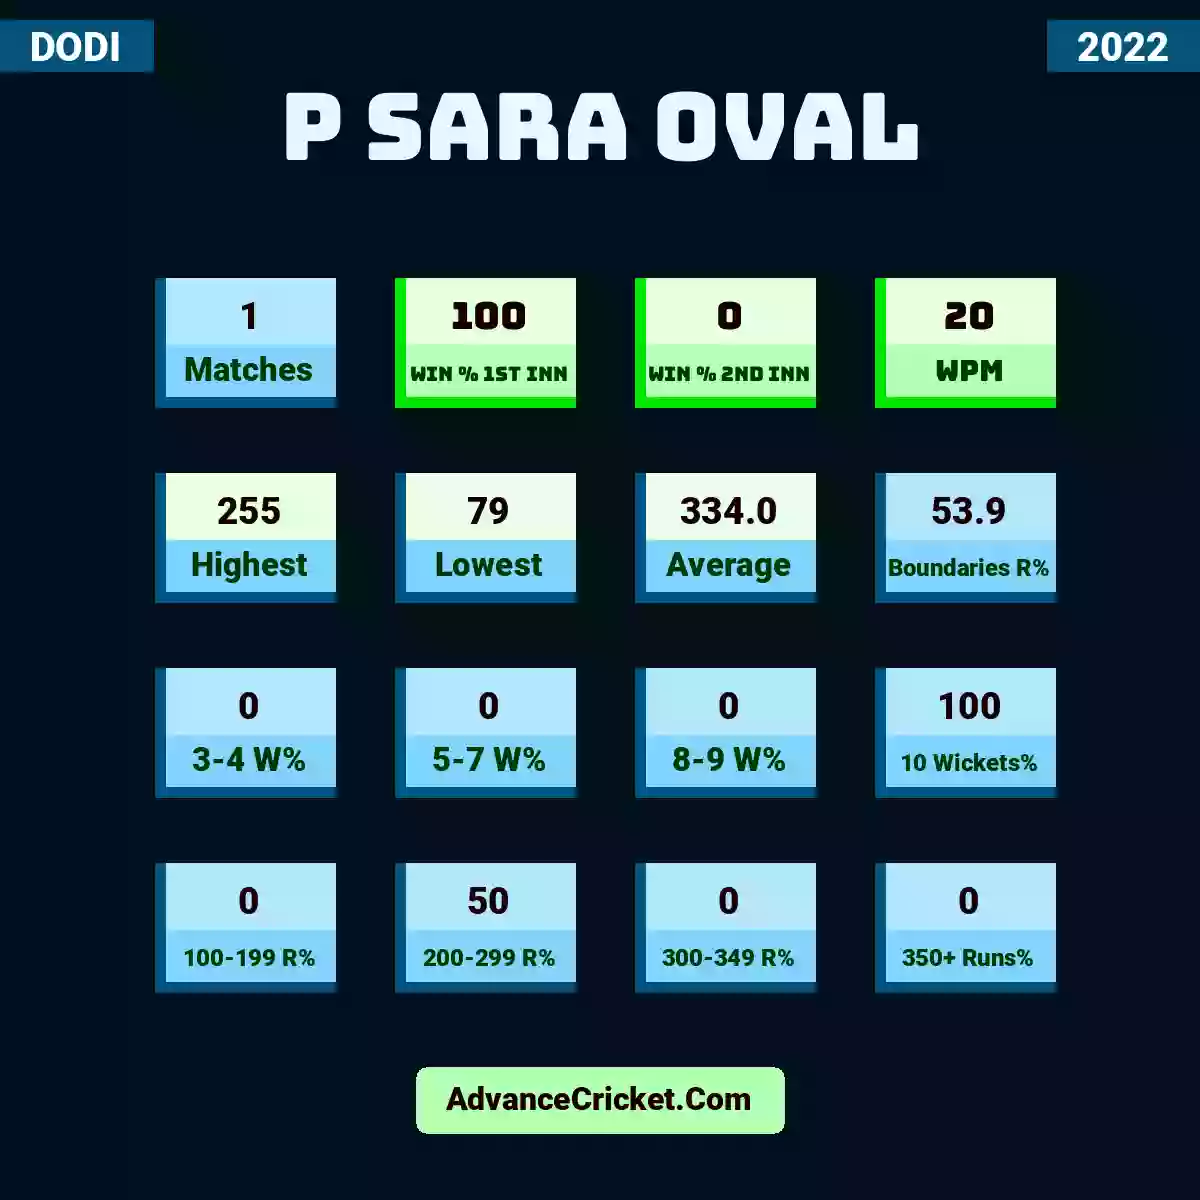 Image showing P Sara Oval with Matches: 1, Win % 1st Inn: 100, Win % 2nd Inn: 0, WPM: 20, Highest: 255, Lowest: 79, Average: 334.0, Boundaries R%: 53.9, 3-4 W%: 0, 5-7 W%: 0, 8-9 W%: 0, 10 Wickets%: 100, 100-199 R%: 0, 200-299 R%: 50, 300-349 R%: 0, 350+ Runs%: 0.